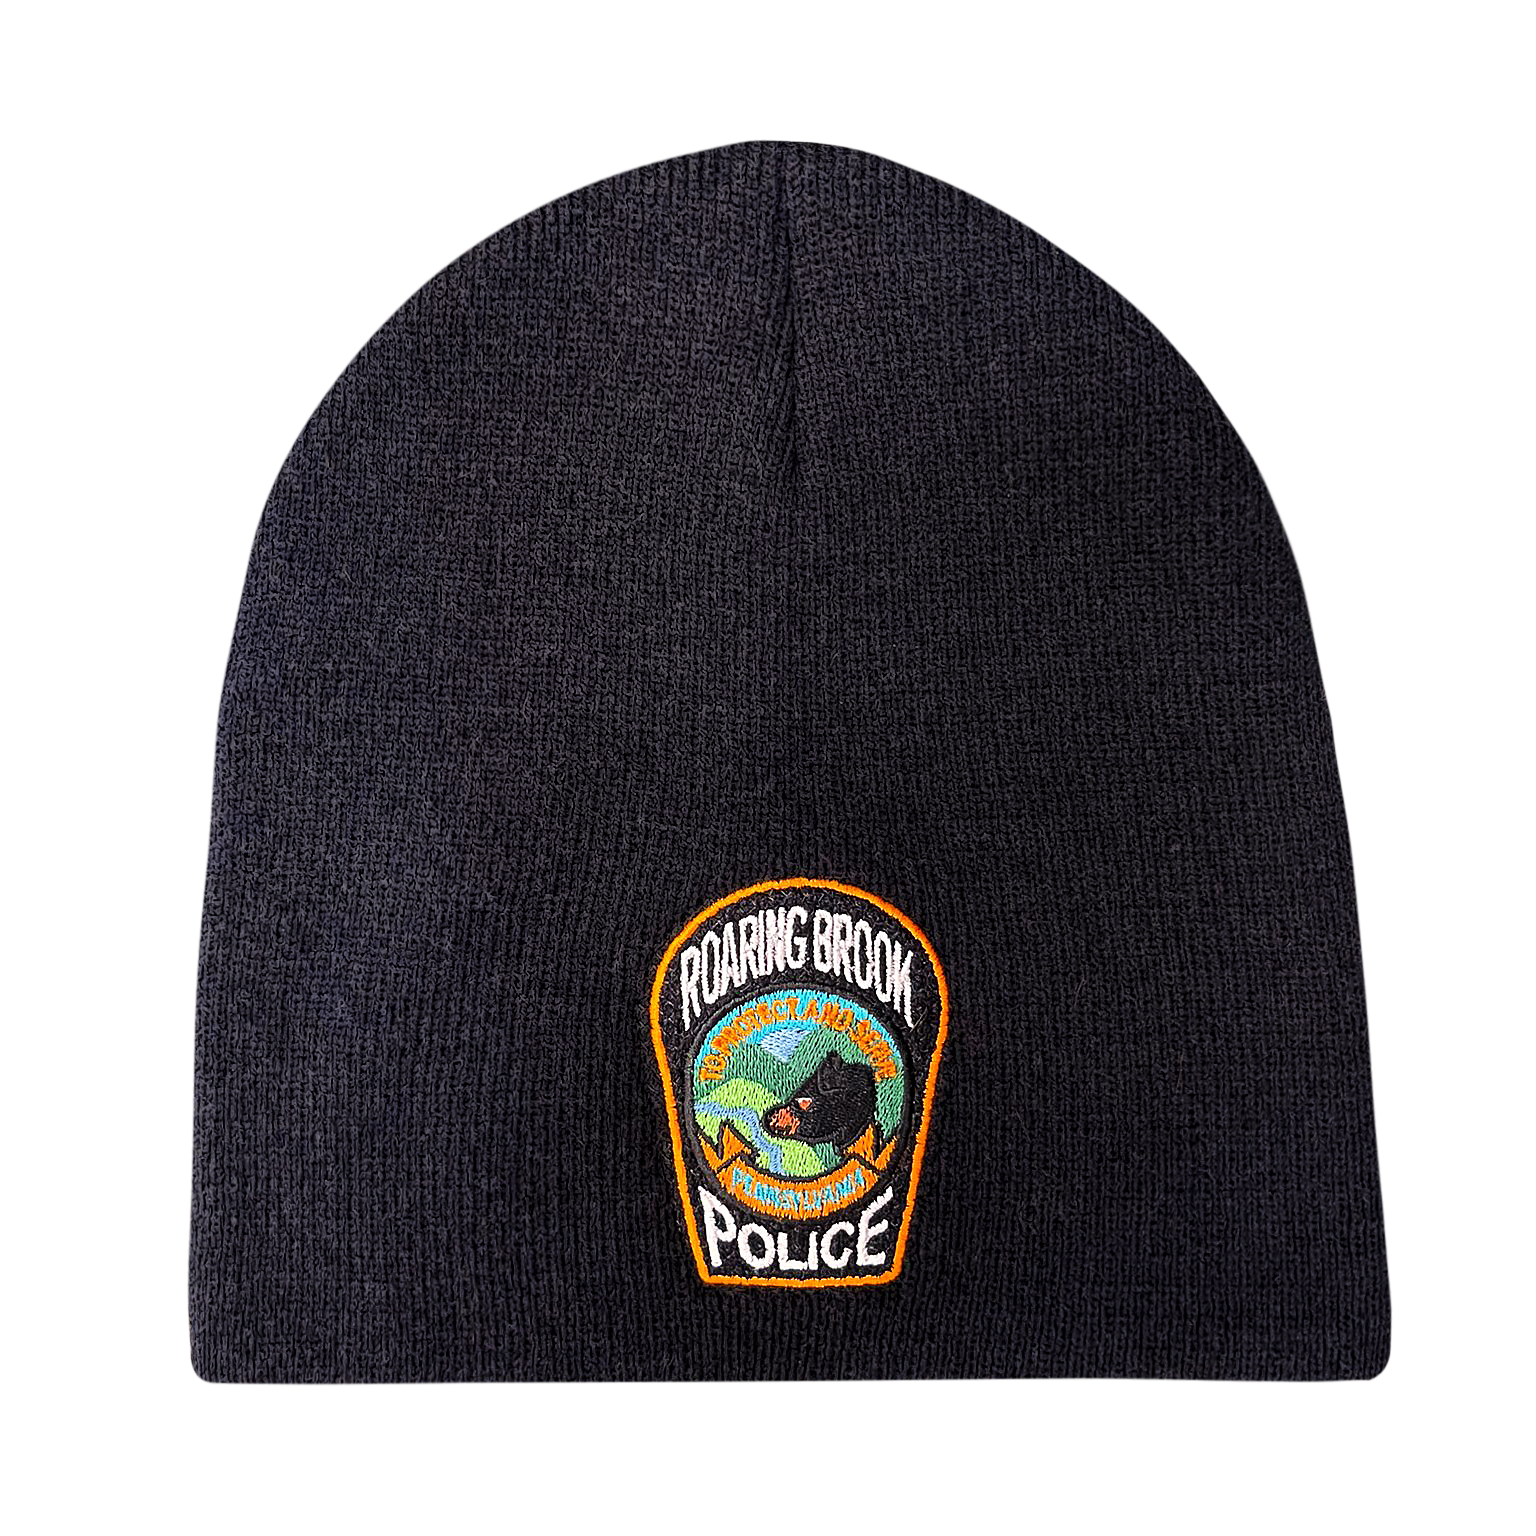 A black beanie with a patch on it that says police